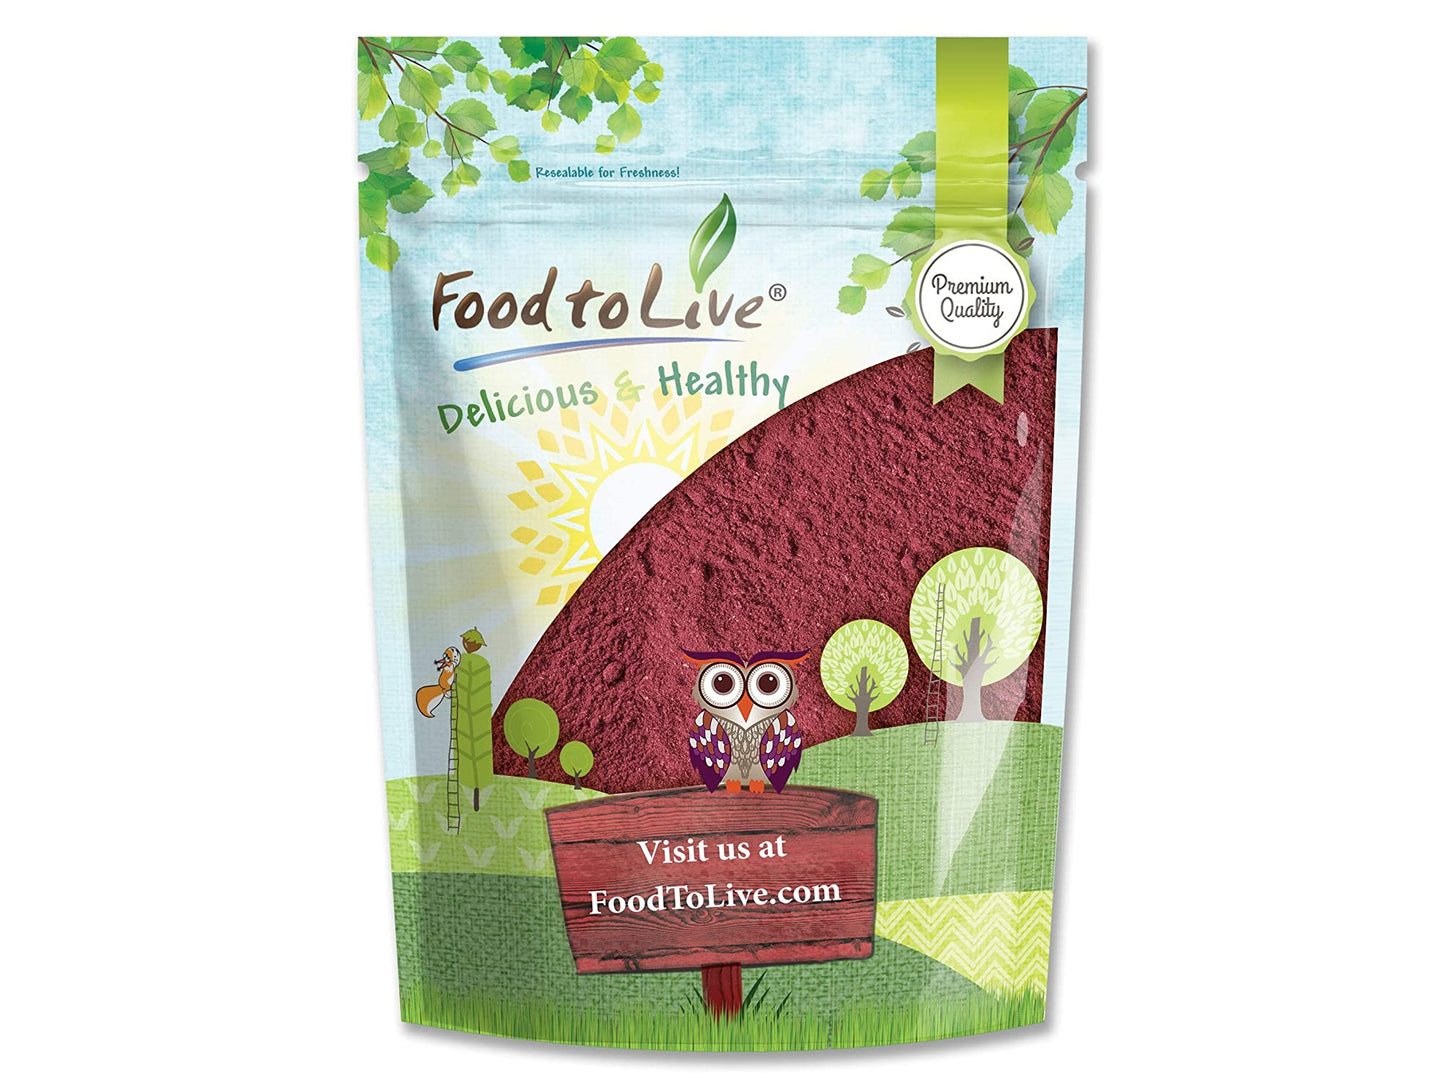 Beet Root Powder — Finely Ground Dried Beet Root, Pure, Kosher and Vegan, Raw Superfood. Bulk Powder. Rich in Folate, Potassium and Fiber. Great for Drinks, Smoothies, Sauces, and Soups